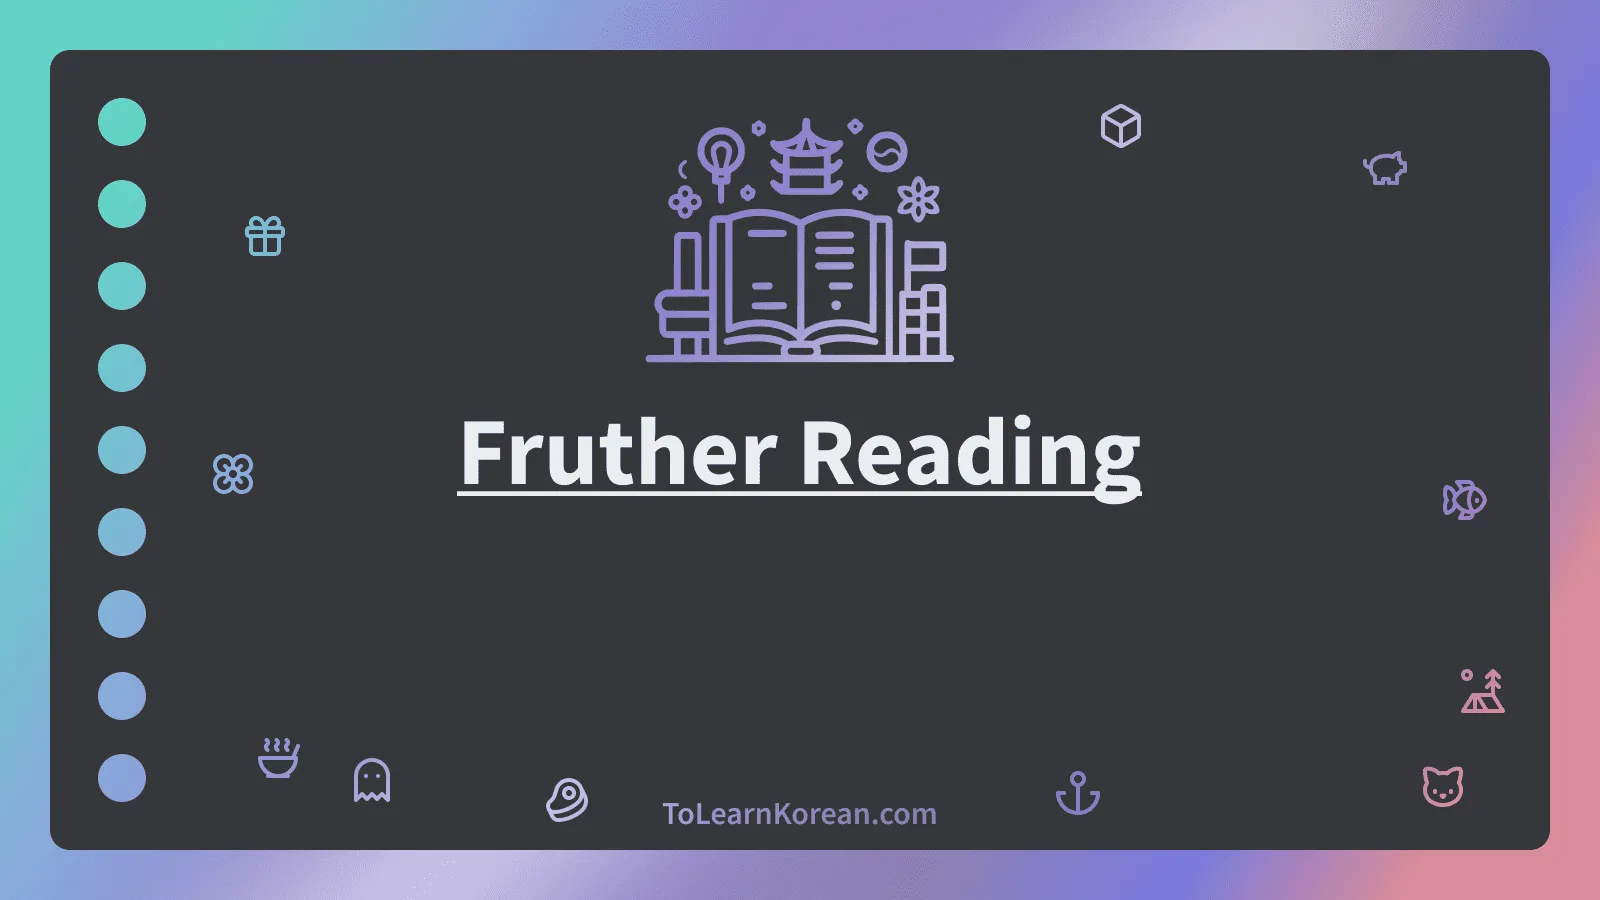 Simple illustration with a gradient background, book icon, and various small icons surrounding the title which is placed prominently in the center.